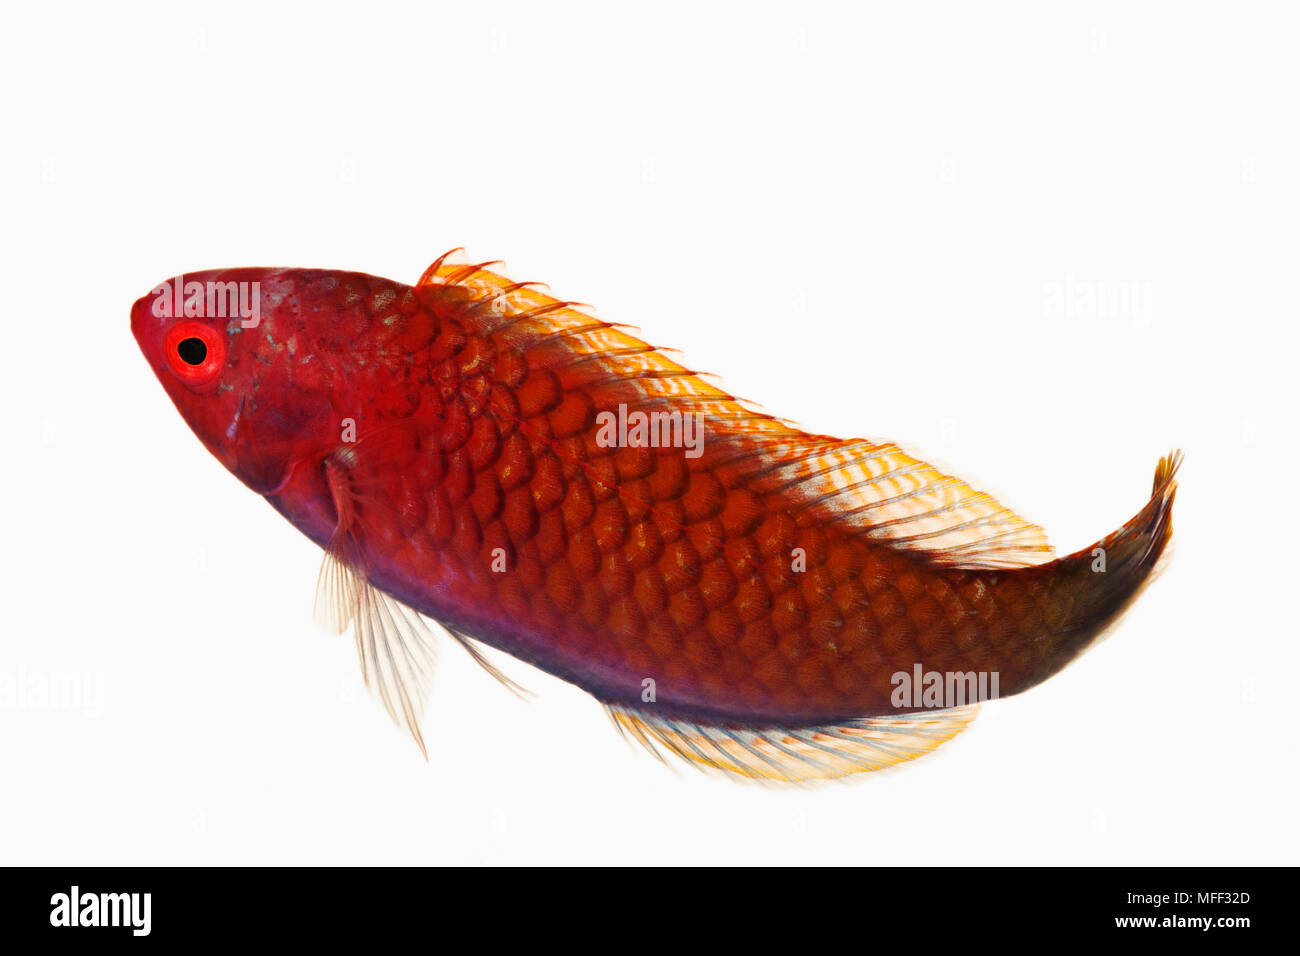 Fairy wrasse fish (Cirrhilabrus sp.). Tropical marine reef fish that feeds on zooplanktons in the wild. Dist. Indo Pacific region. Studio shot against Stock Photo